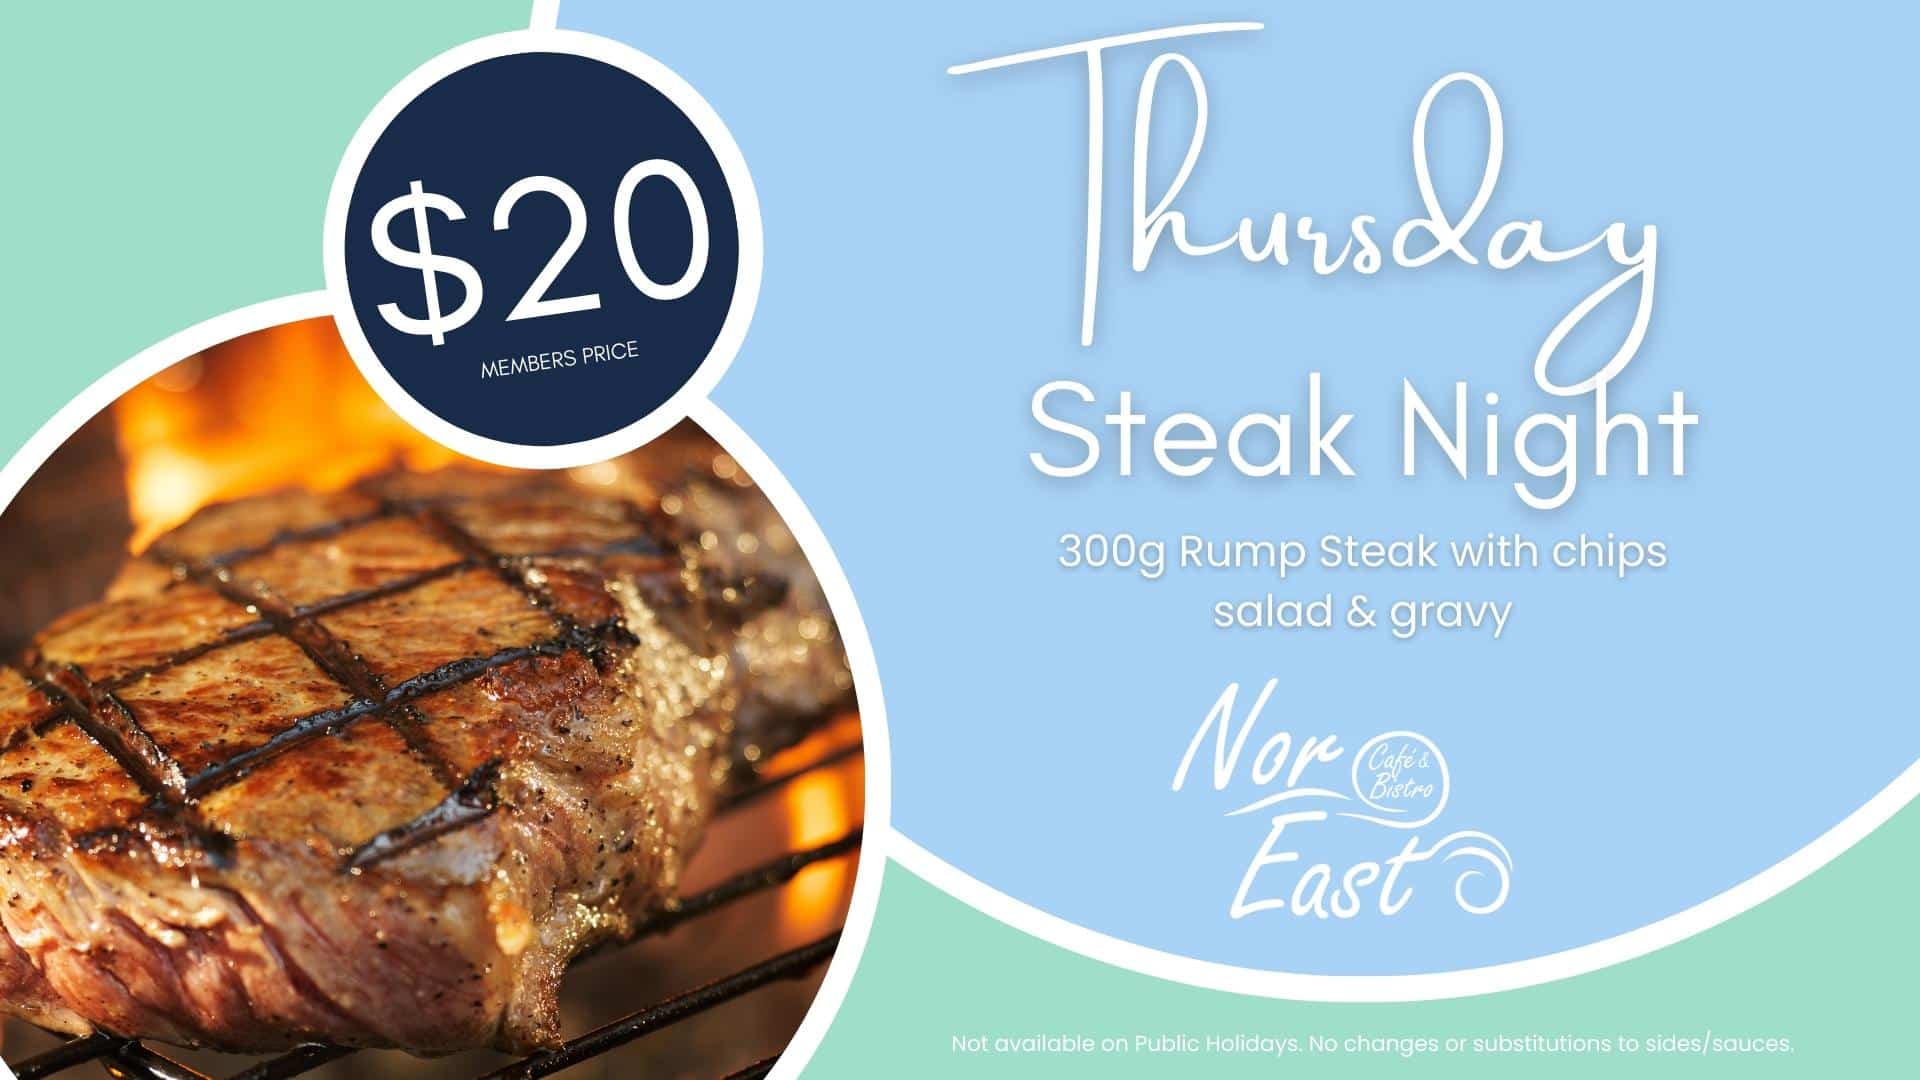 $20 Steak Night every Thursday at Nor East at Tradies Caringbah. 300g Rump Steak with chips, salad & gravy. No changes or substitutions to sides/sauces. Members price listed.